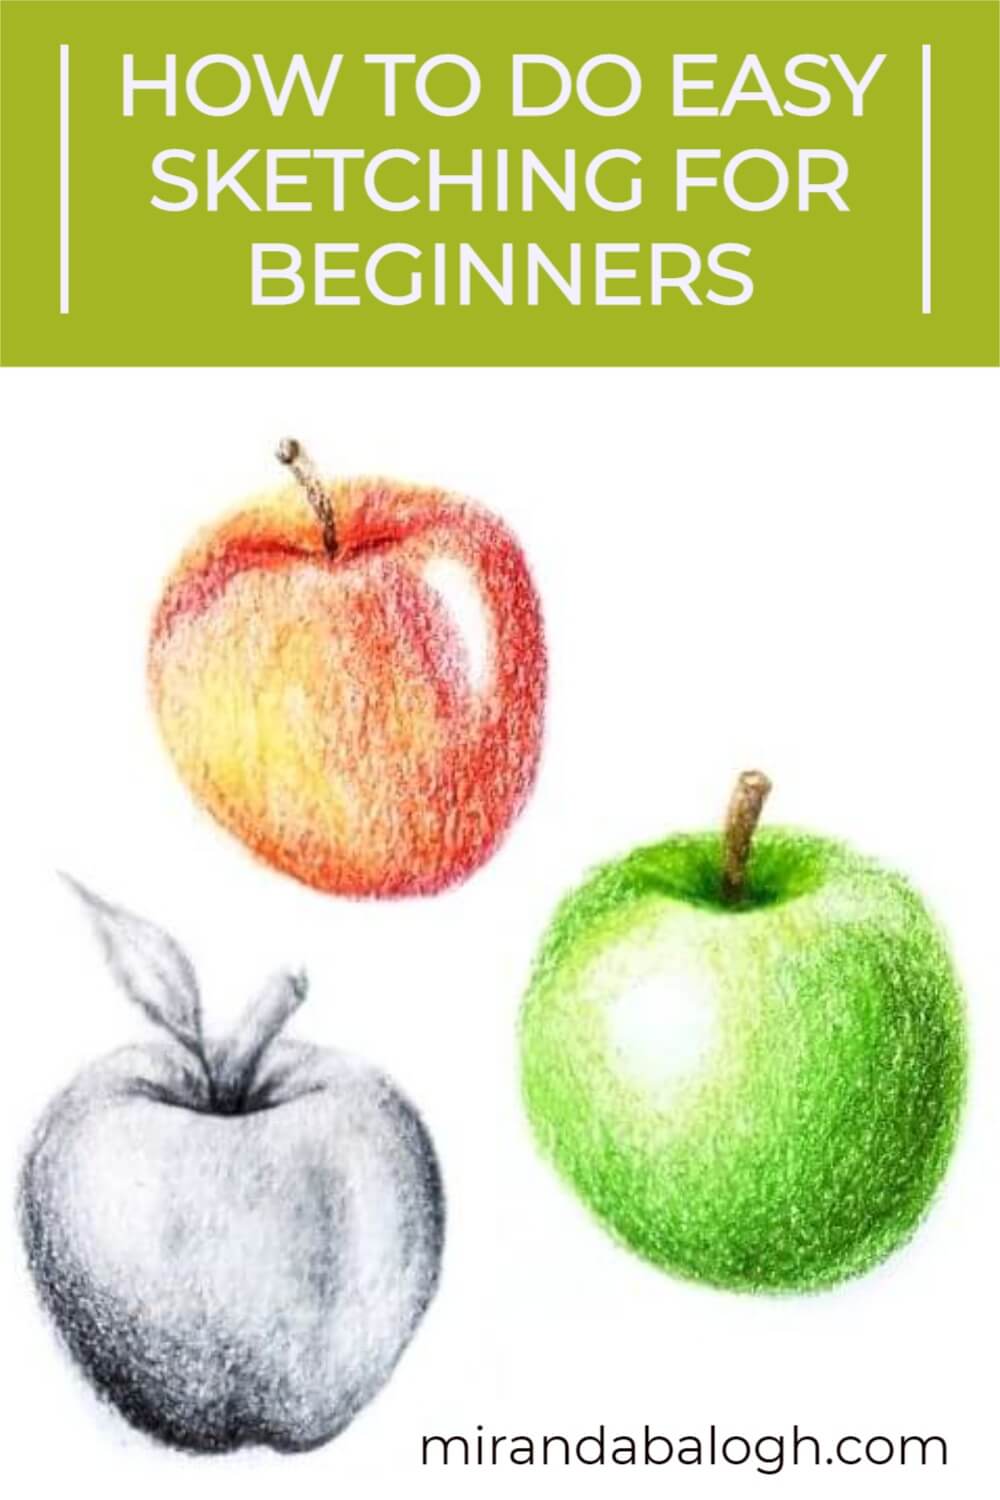 How do you start beginner sketching? You start by practicing easy step by step sketching for beginners. For example, explore easy pencil drawing exercises by learning basic shading techniques, understanding light and shadow, and drawing a variety of beginner drawing ideas including 3D shapes, apples, and simple landscapes. So save this pin to your art board to inspire your daily creative practice.